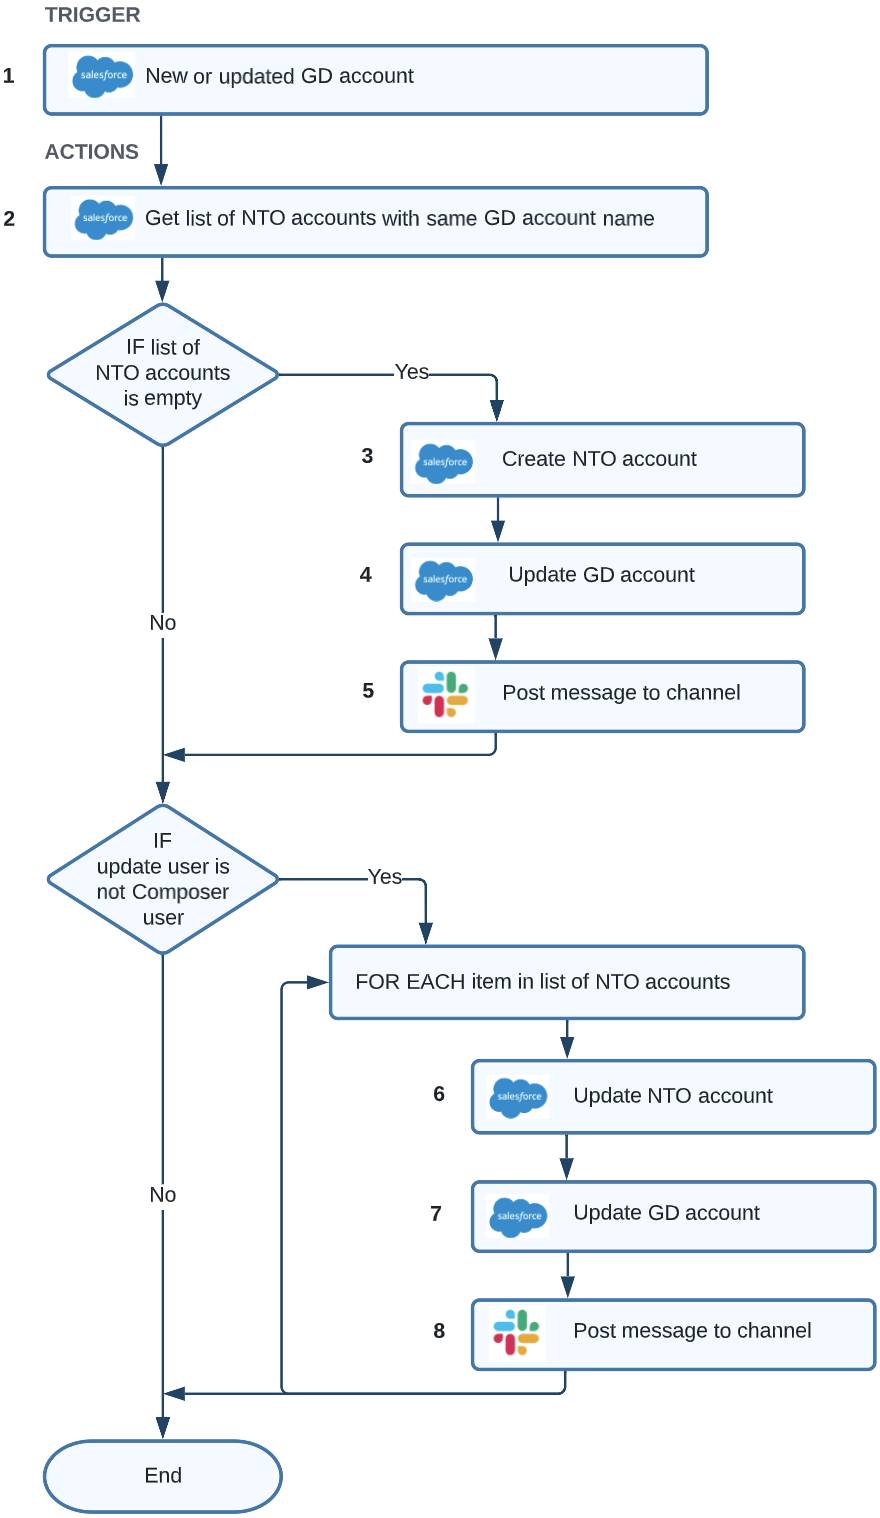 Flowchart for the integration flow for NTO use case.